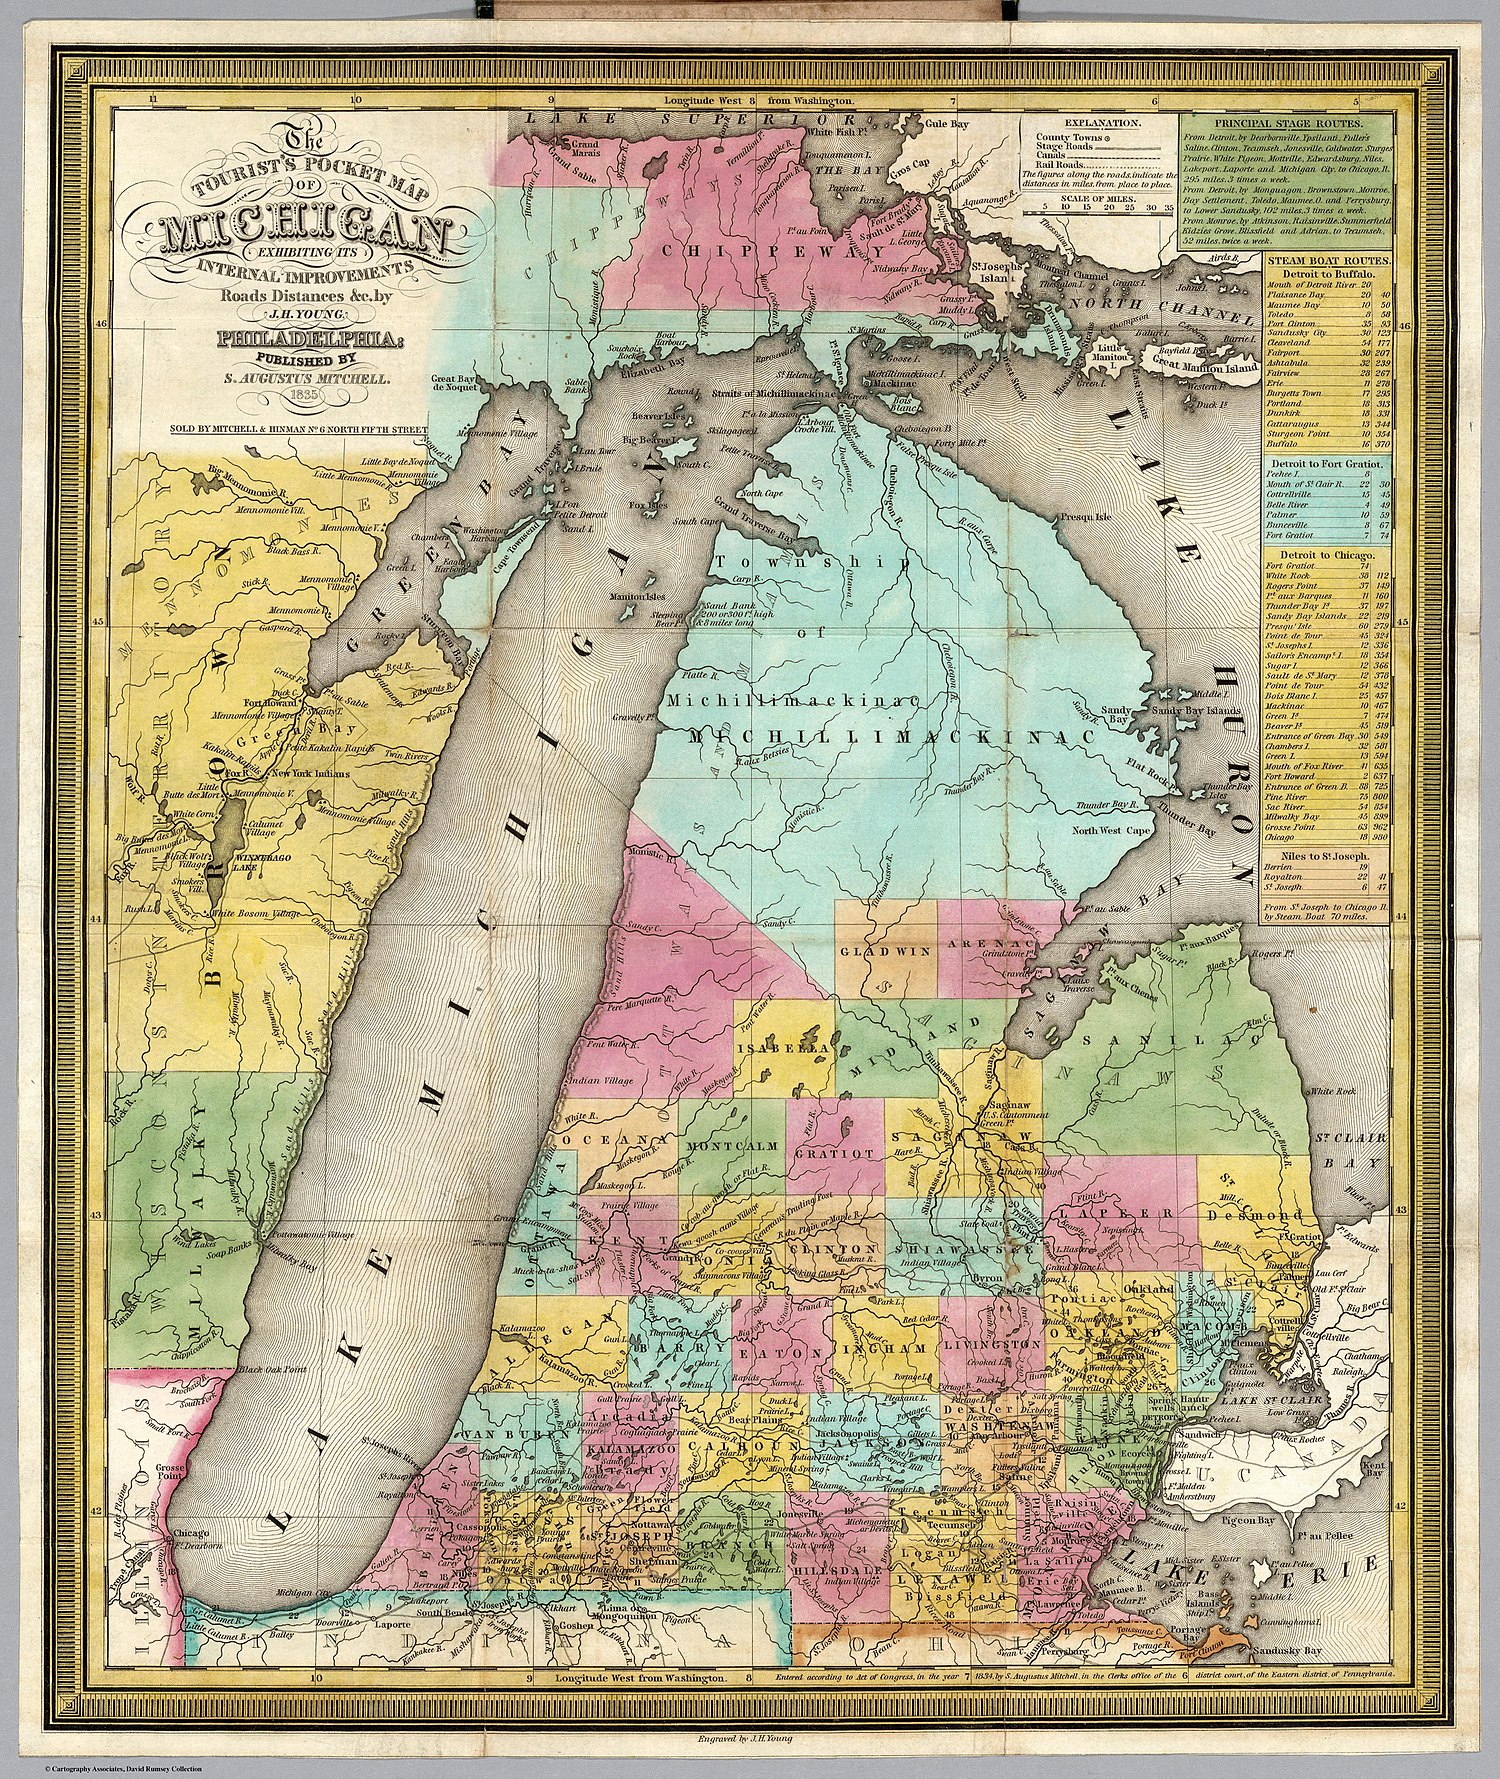 1835 map of Michigan, with the Leelanau Peninsula labelled as "South Cape"